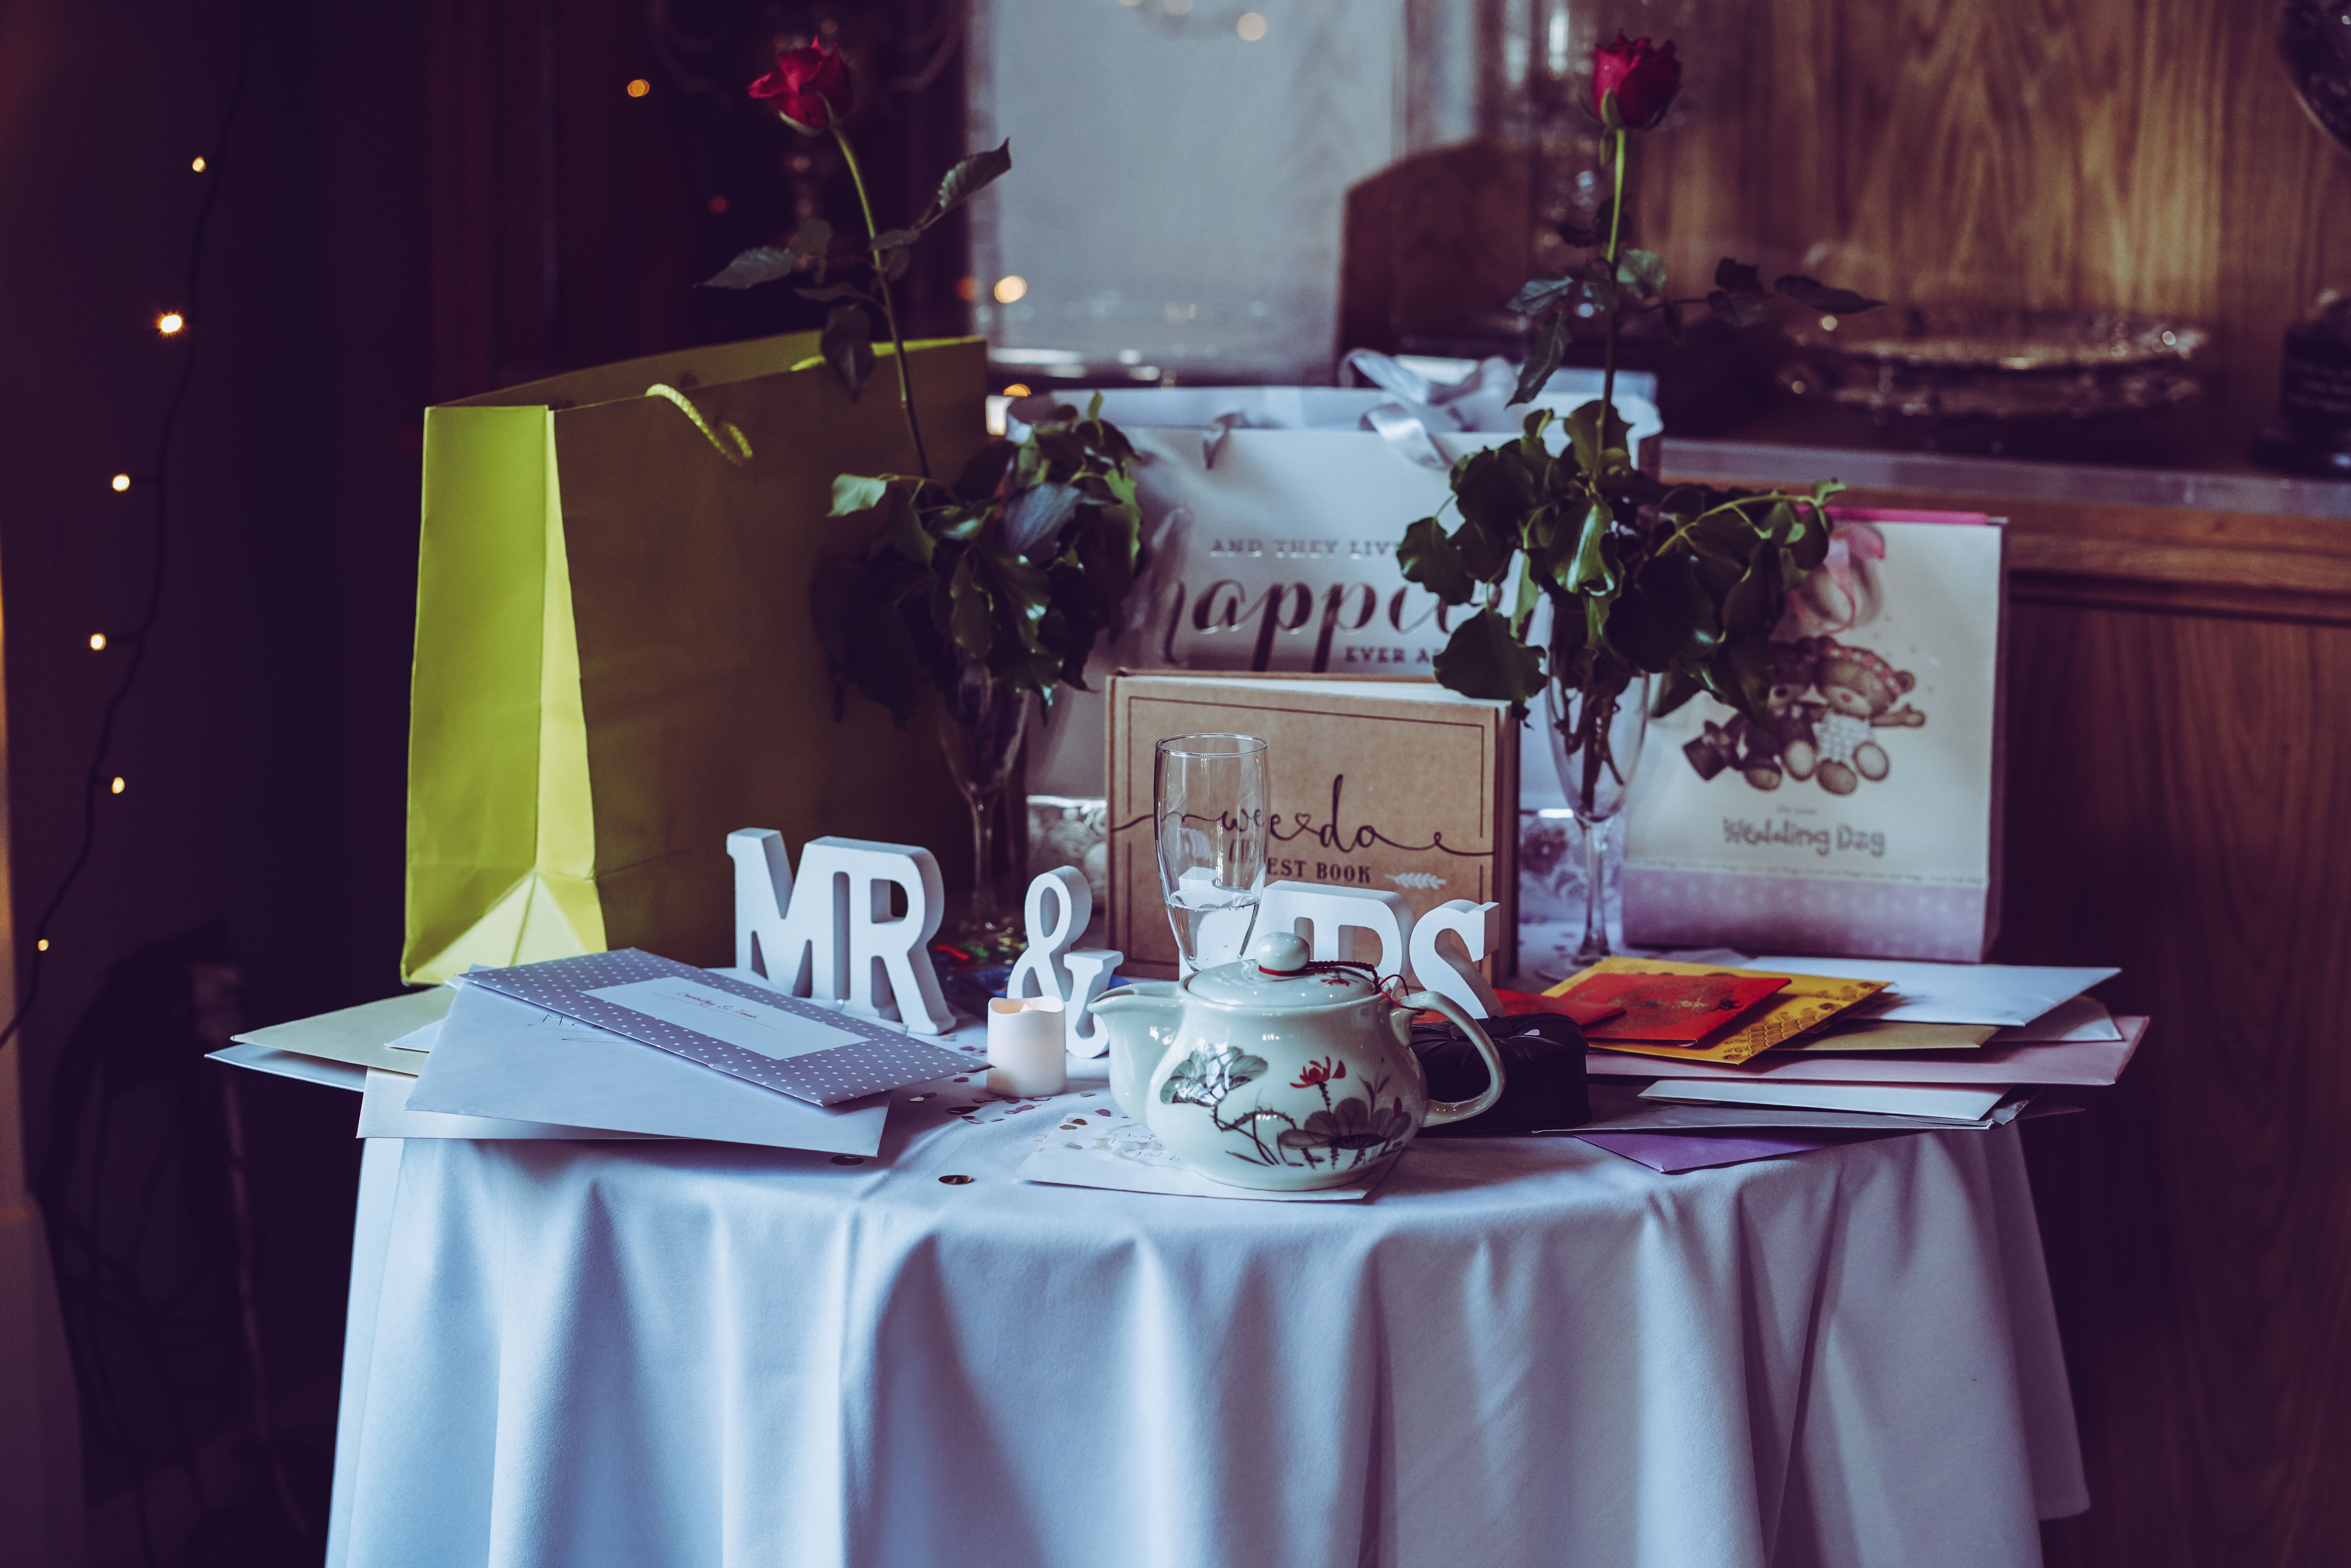 white tablecloth gift table at a wedding reception, with gift bags and cards